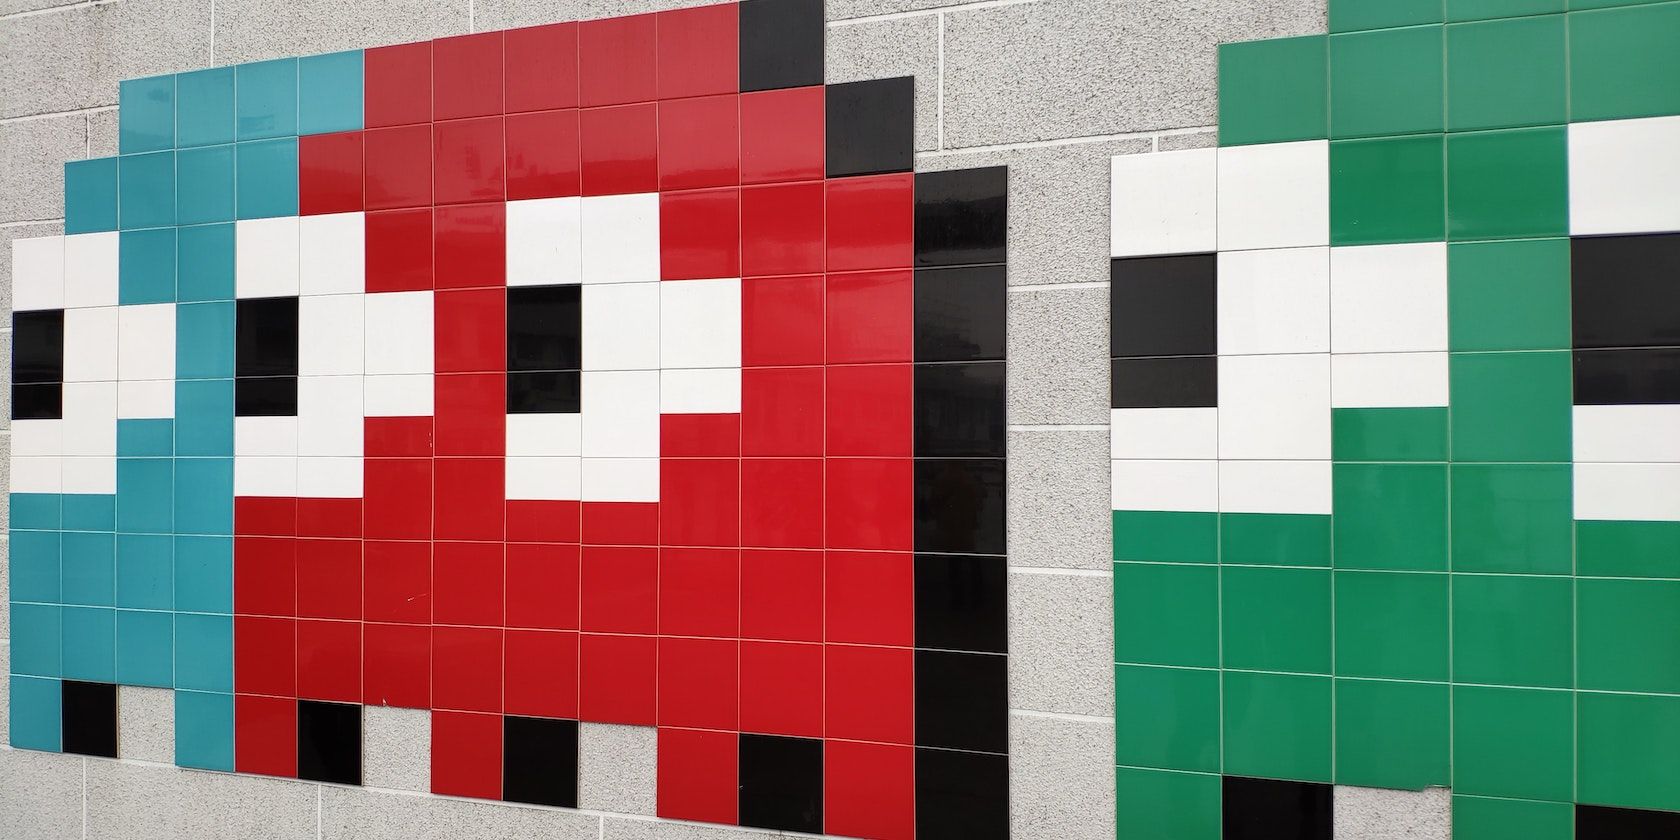 Large ghost characters from the game Pacman made from colored tiles on a wall.